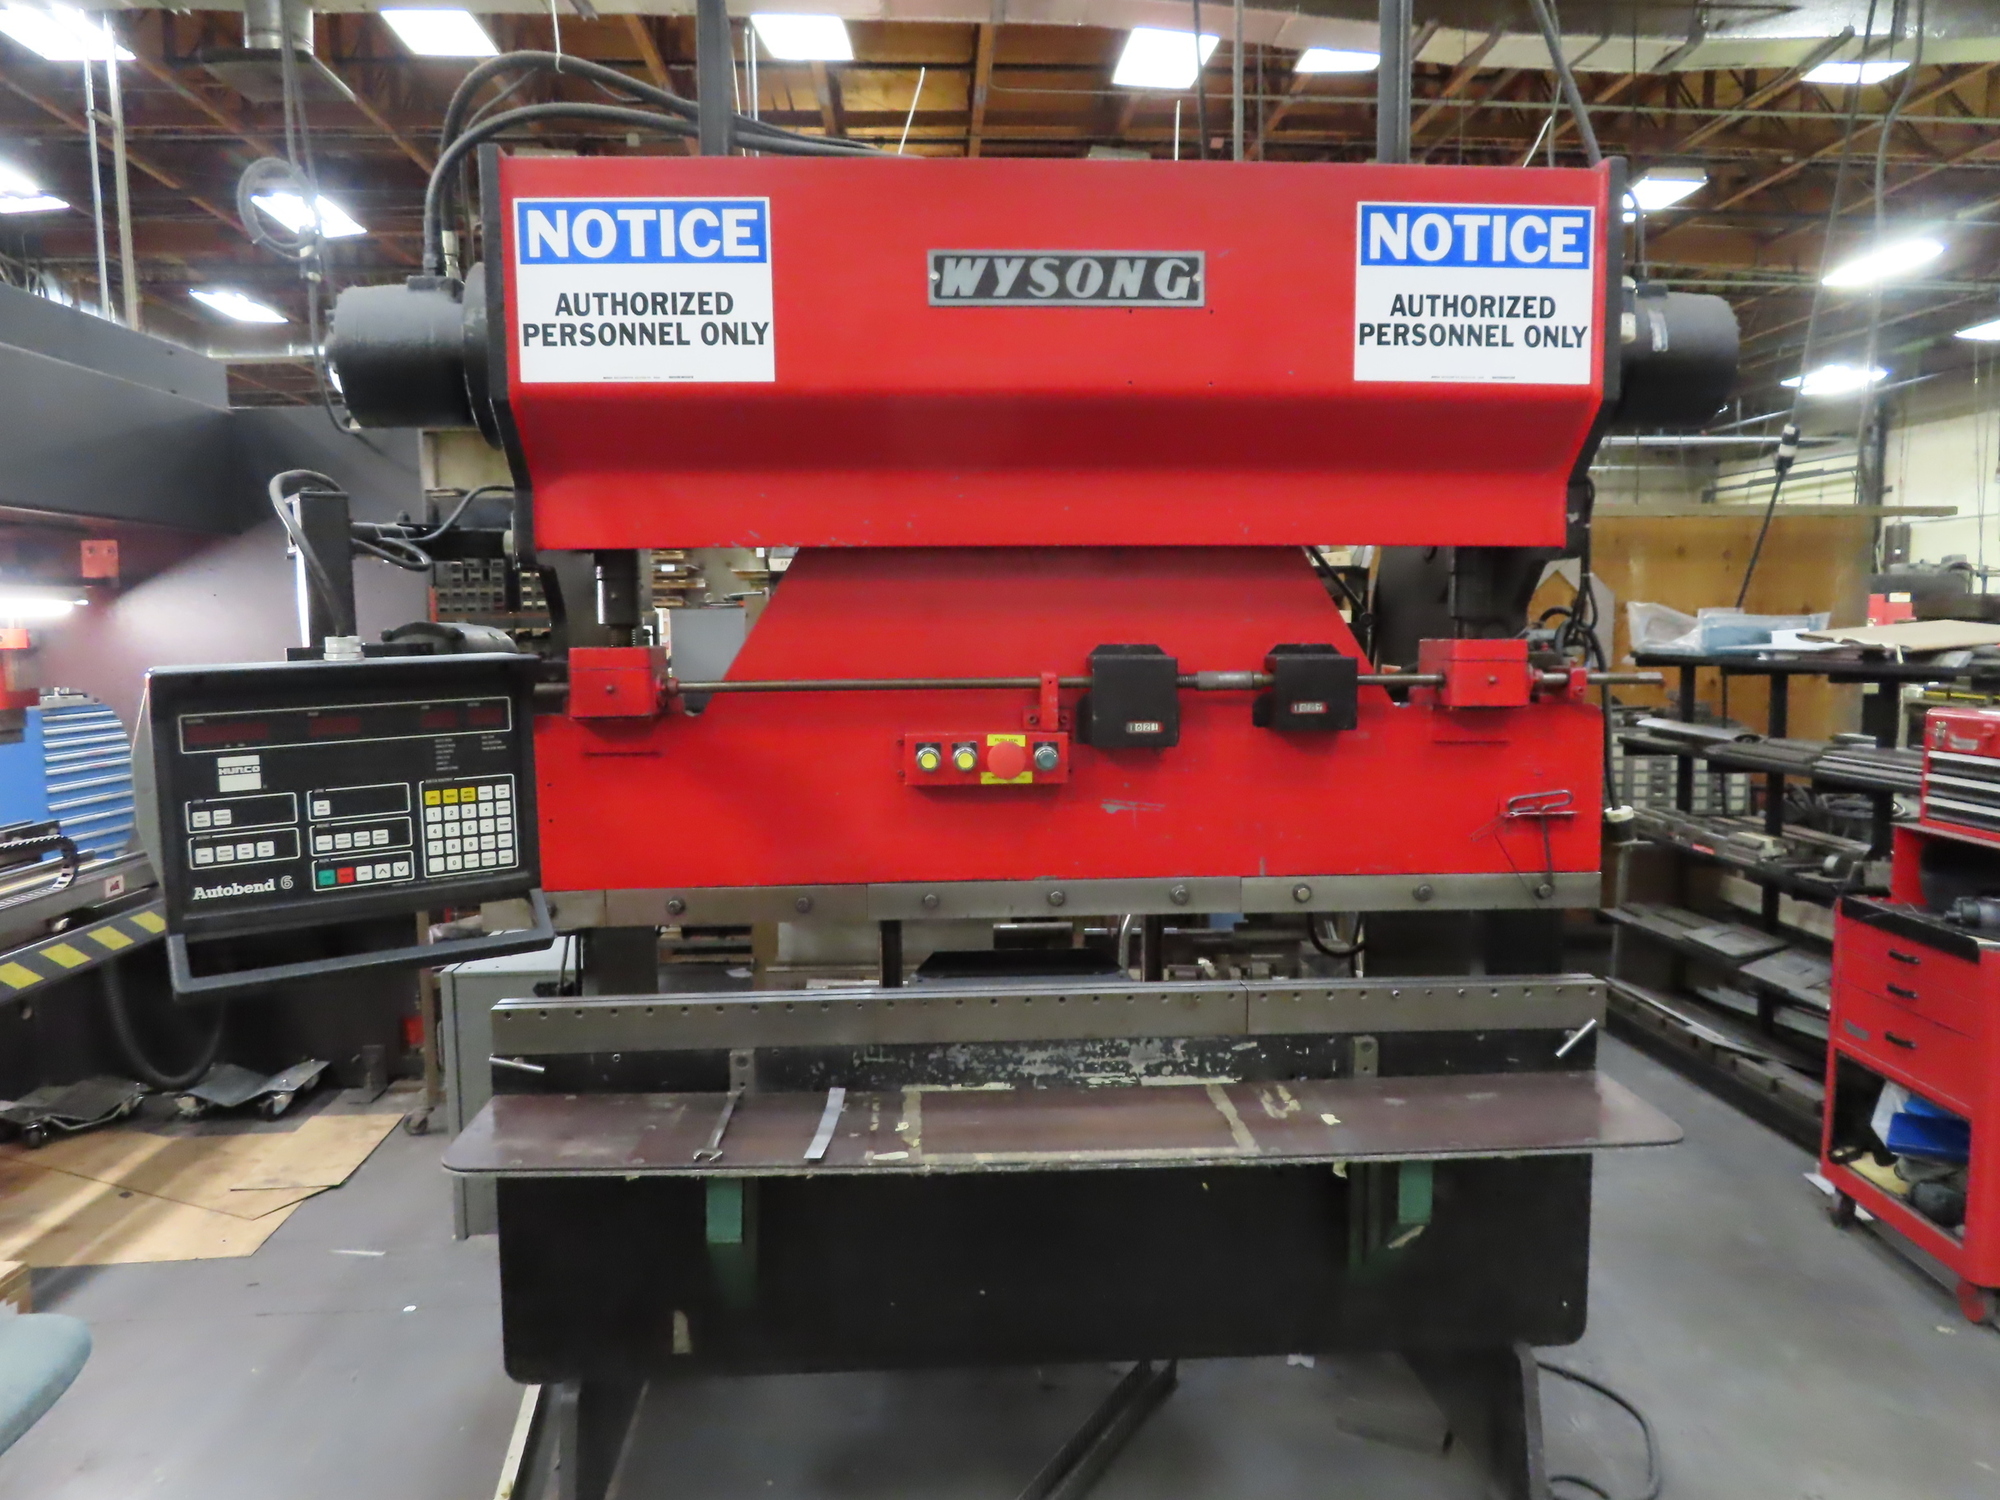 WYSONG MILES COMPANY H-4072 Sold Equipment | MD Equipment Services LLC